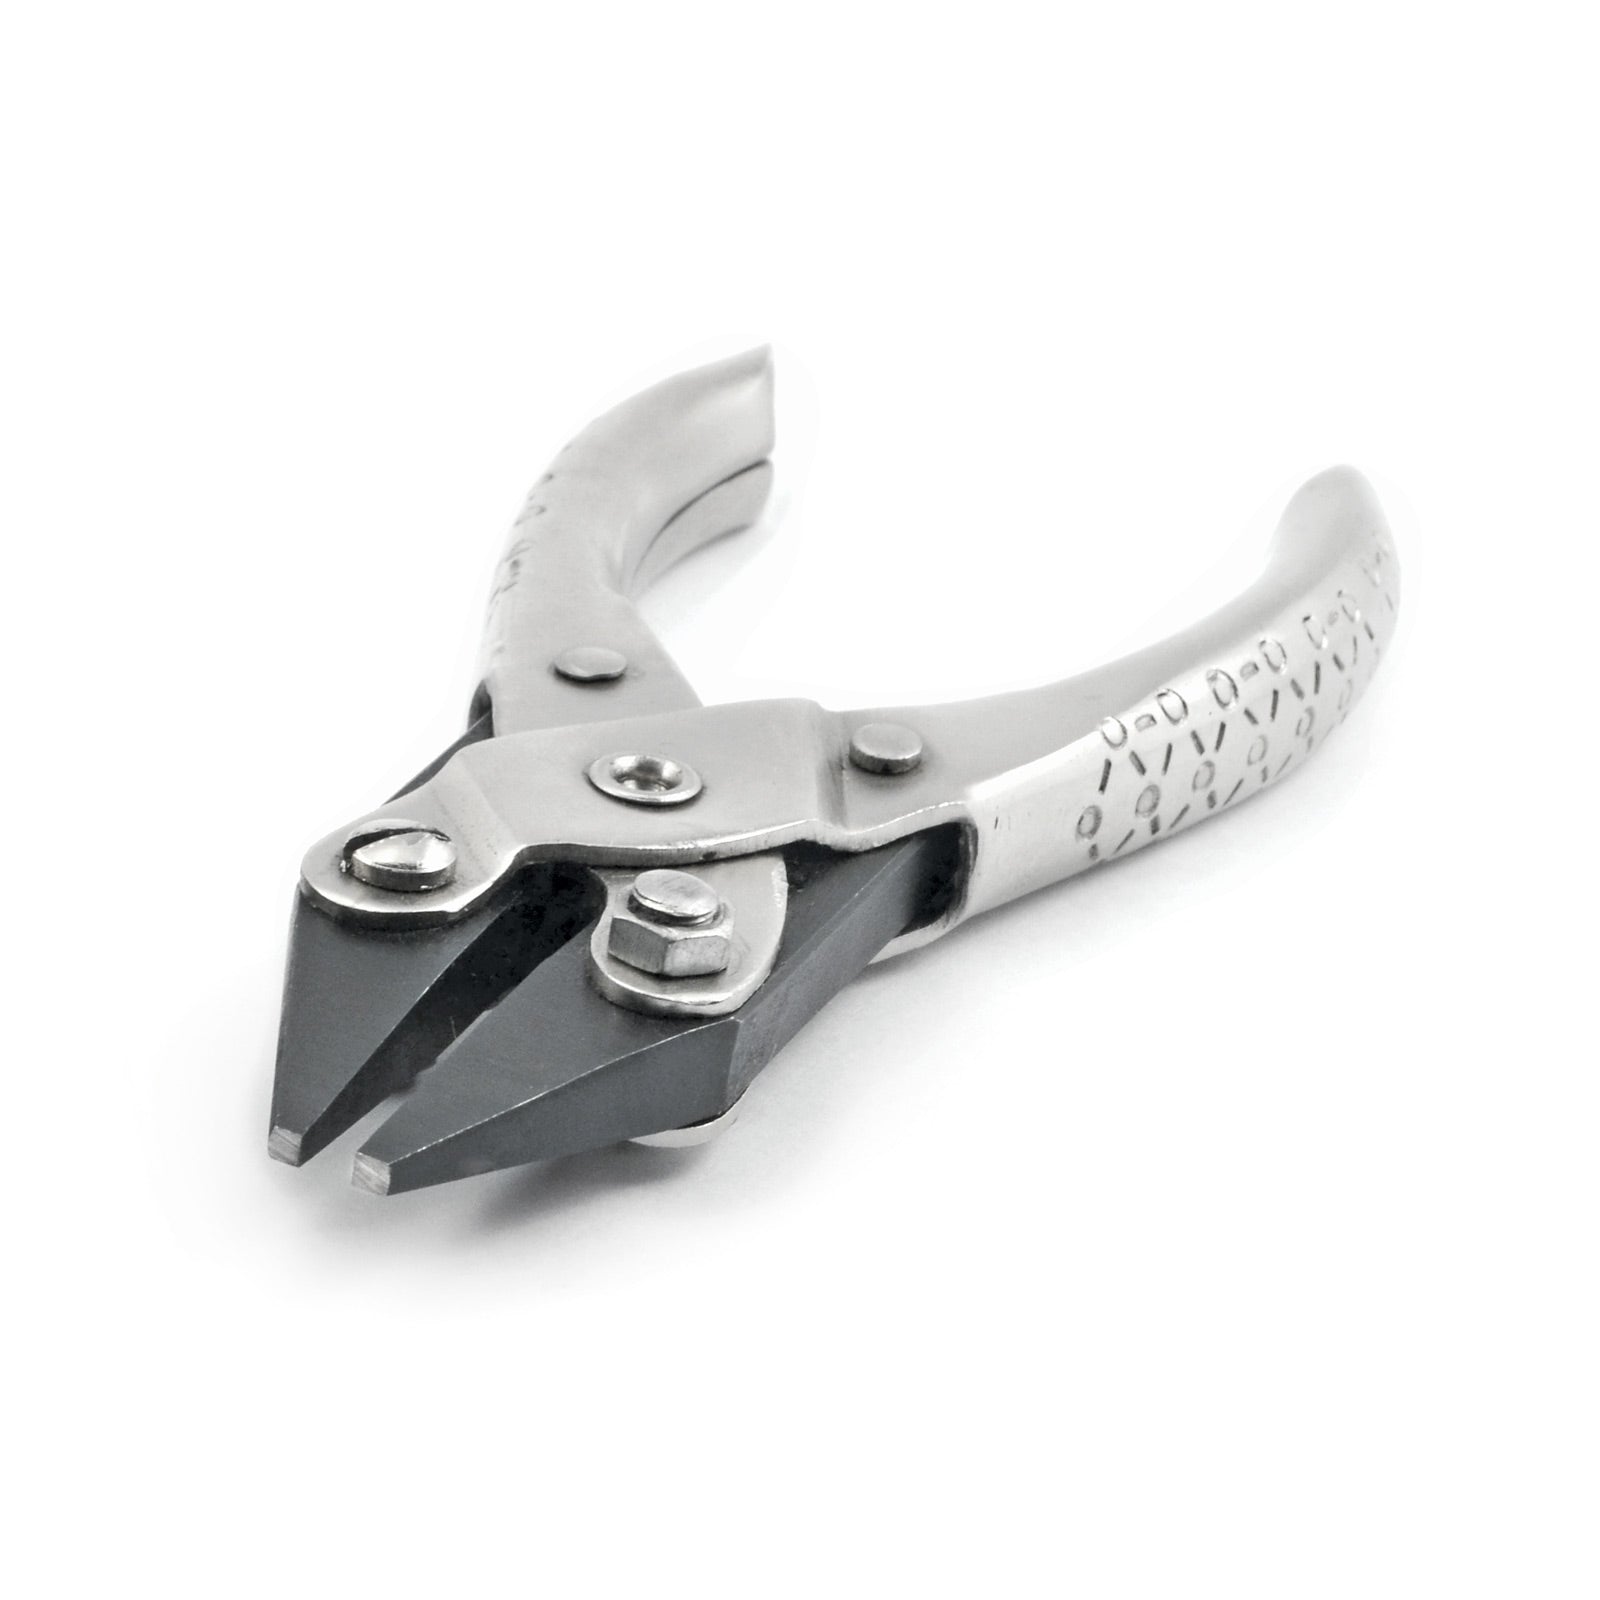 Parallel Jaw Plier, Chain Nose with Tapered Jaws - Micro - Mark Nippers